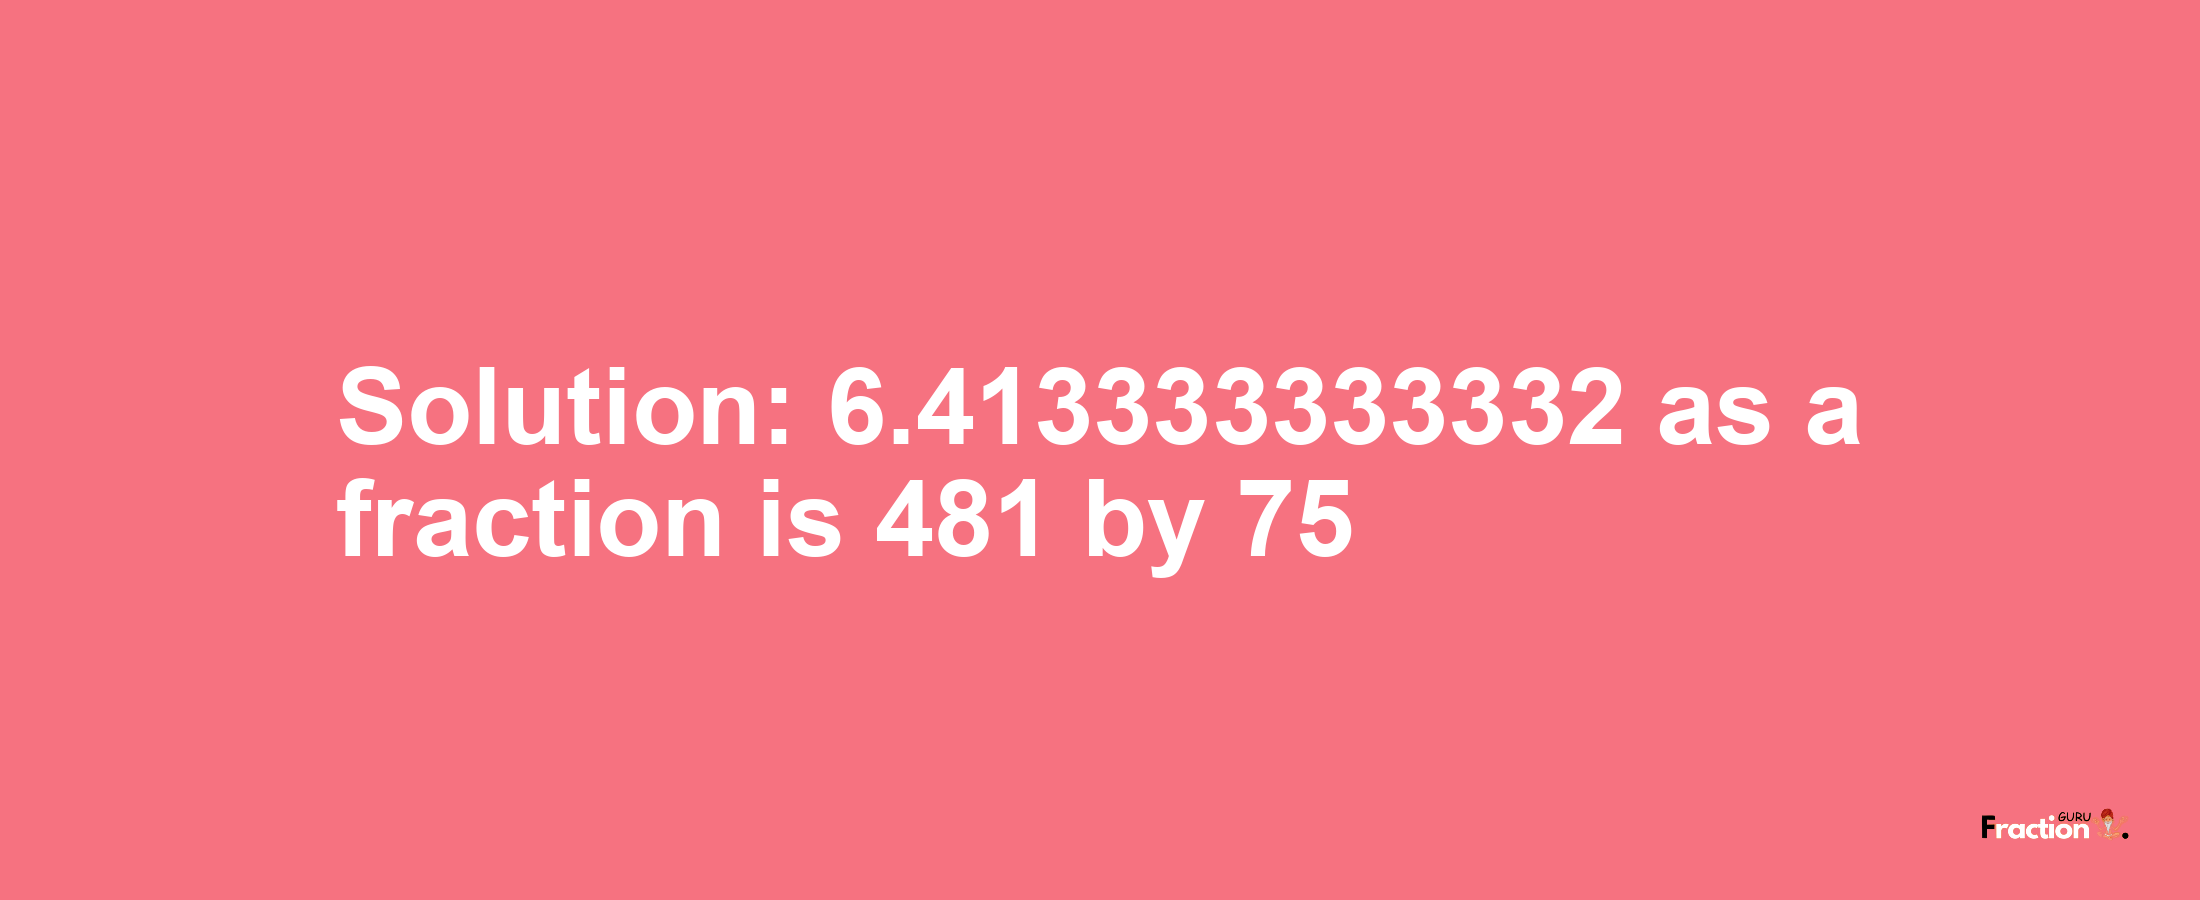 Solution:6.413333333332 as a fraction is 481/75